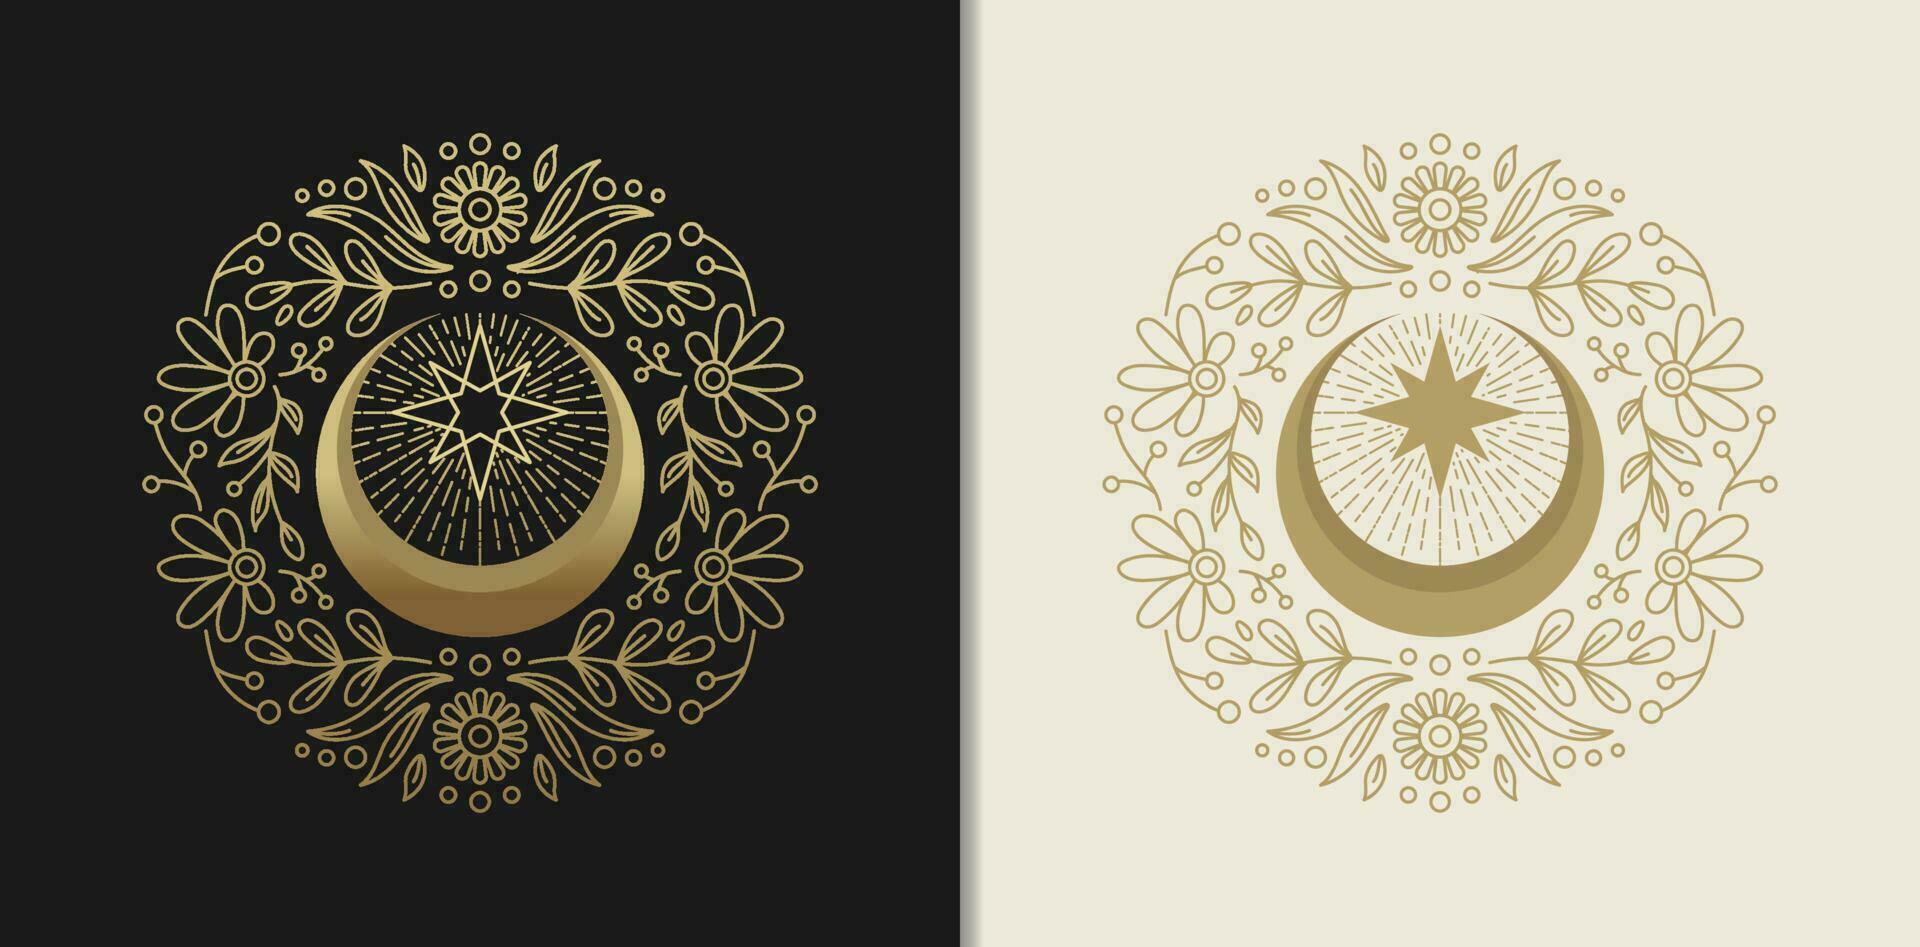 Crescent Moon and Stellar Sparkles with Ornate Floral Engravings vector